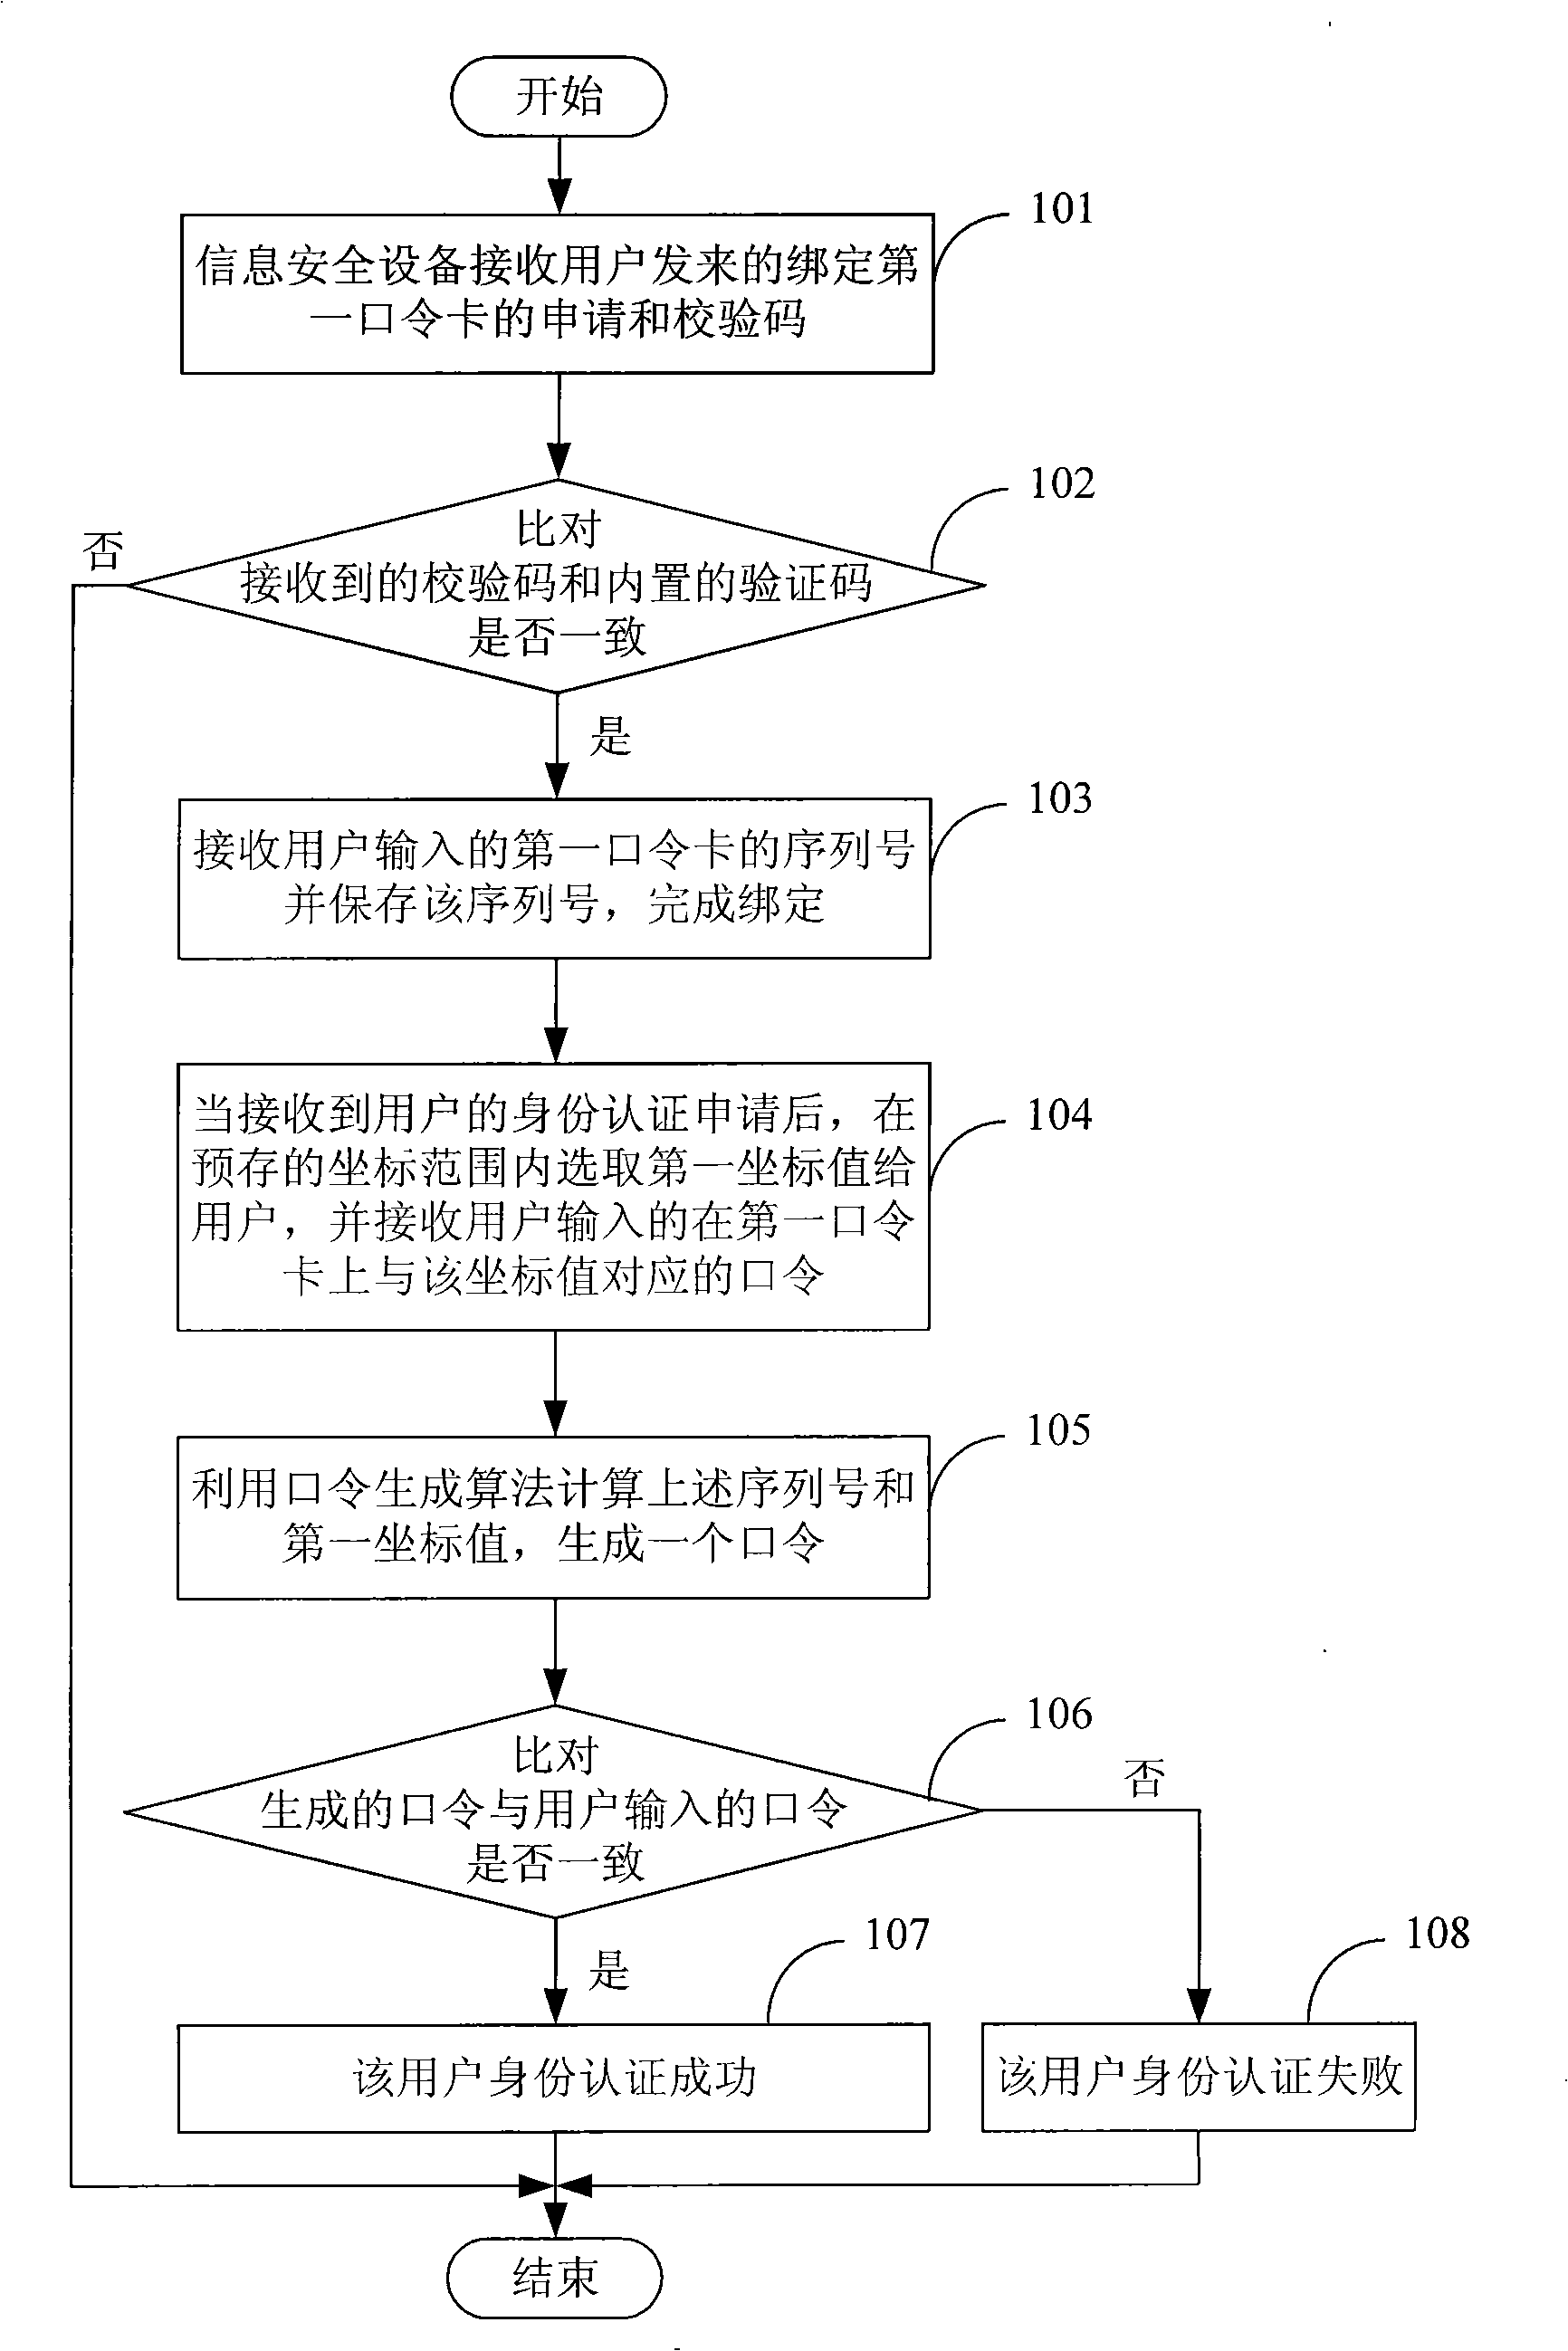 Method for improving identification authentication security based on password card